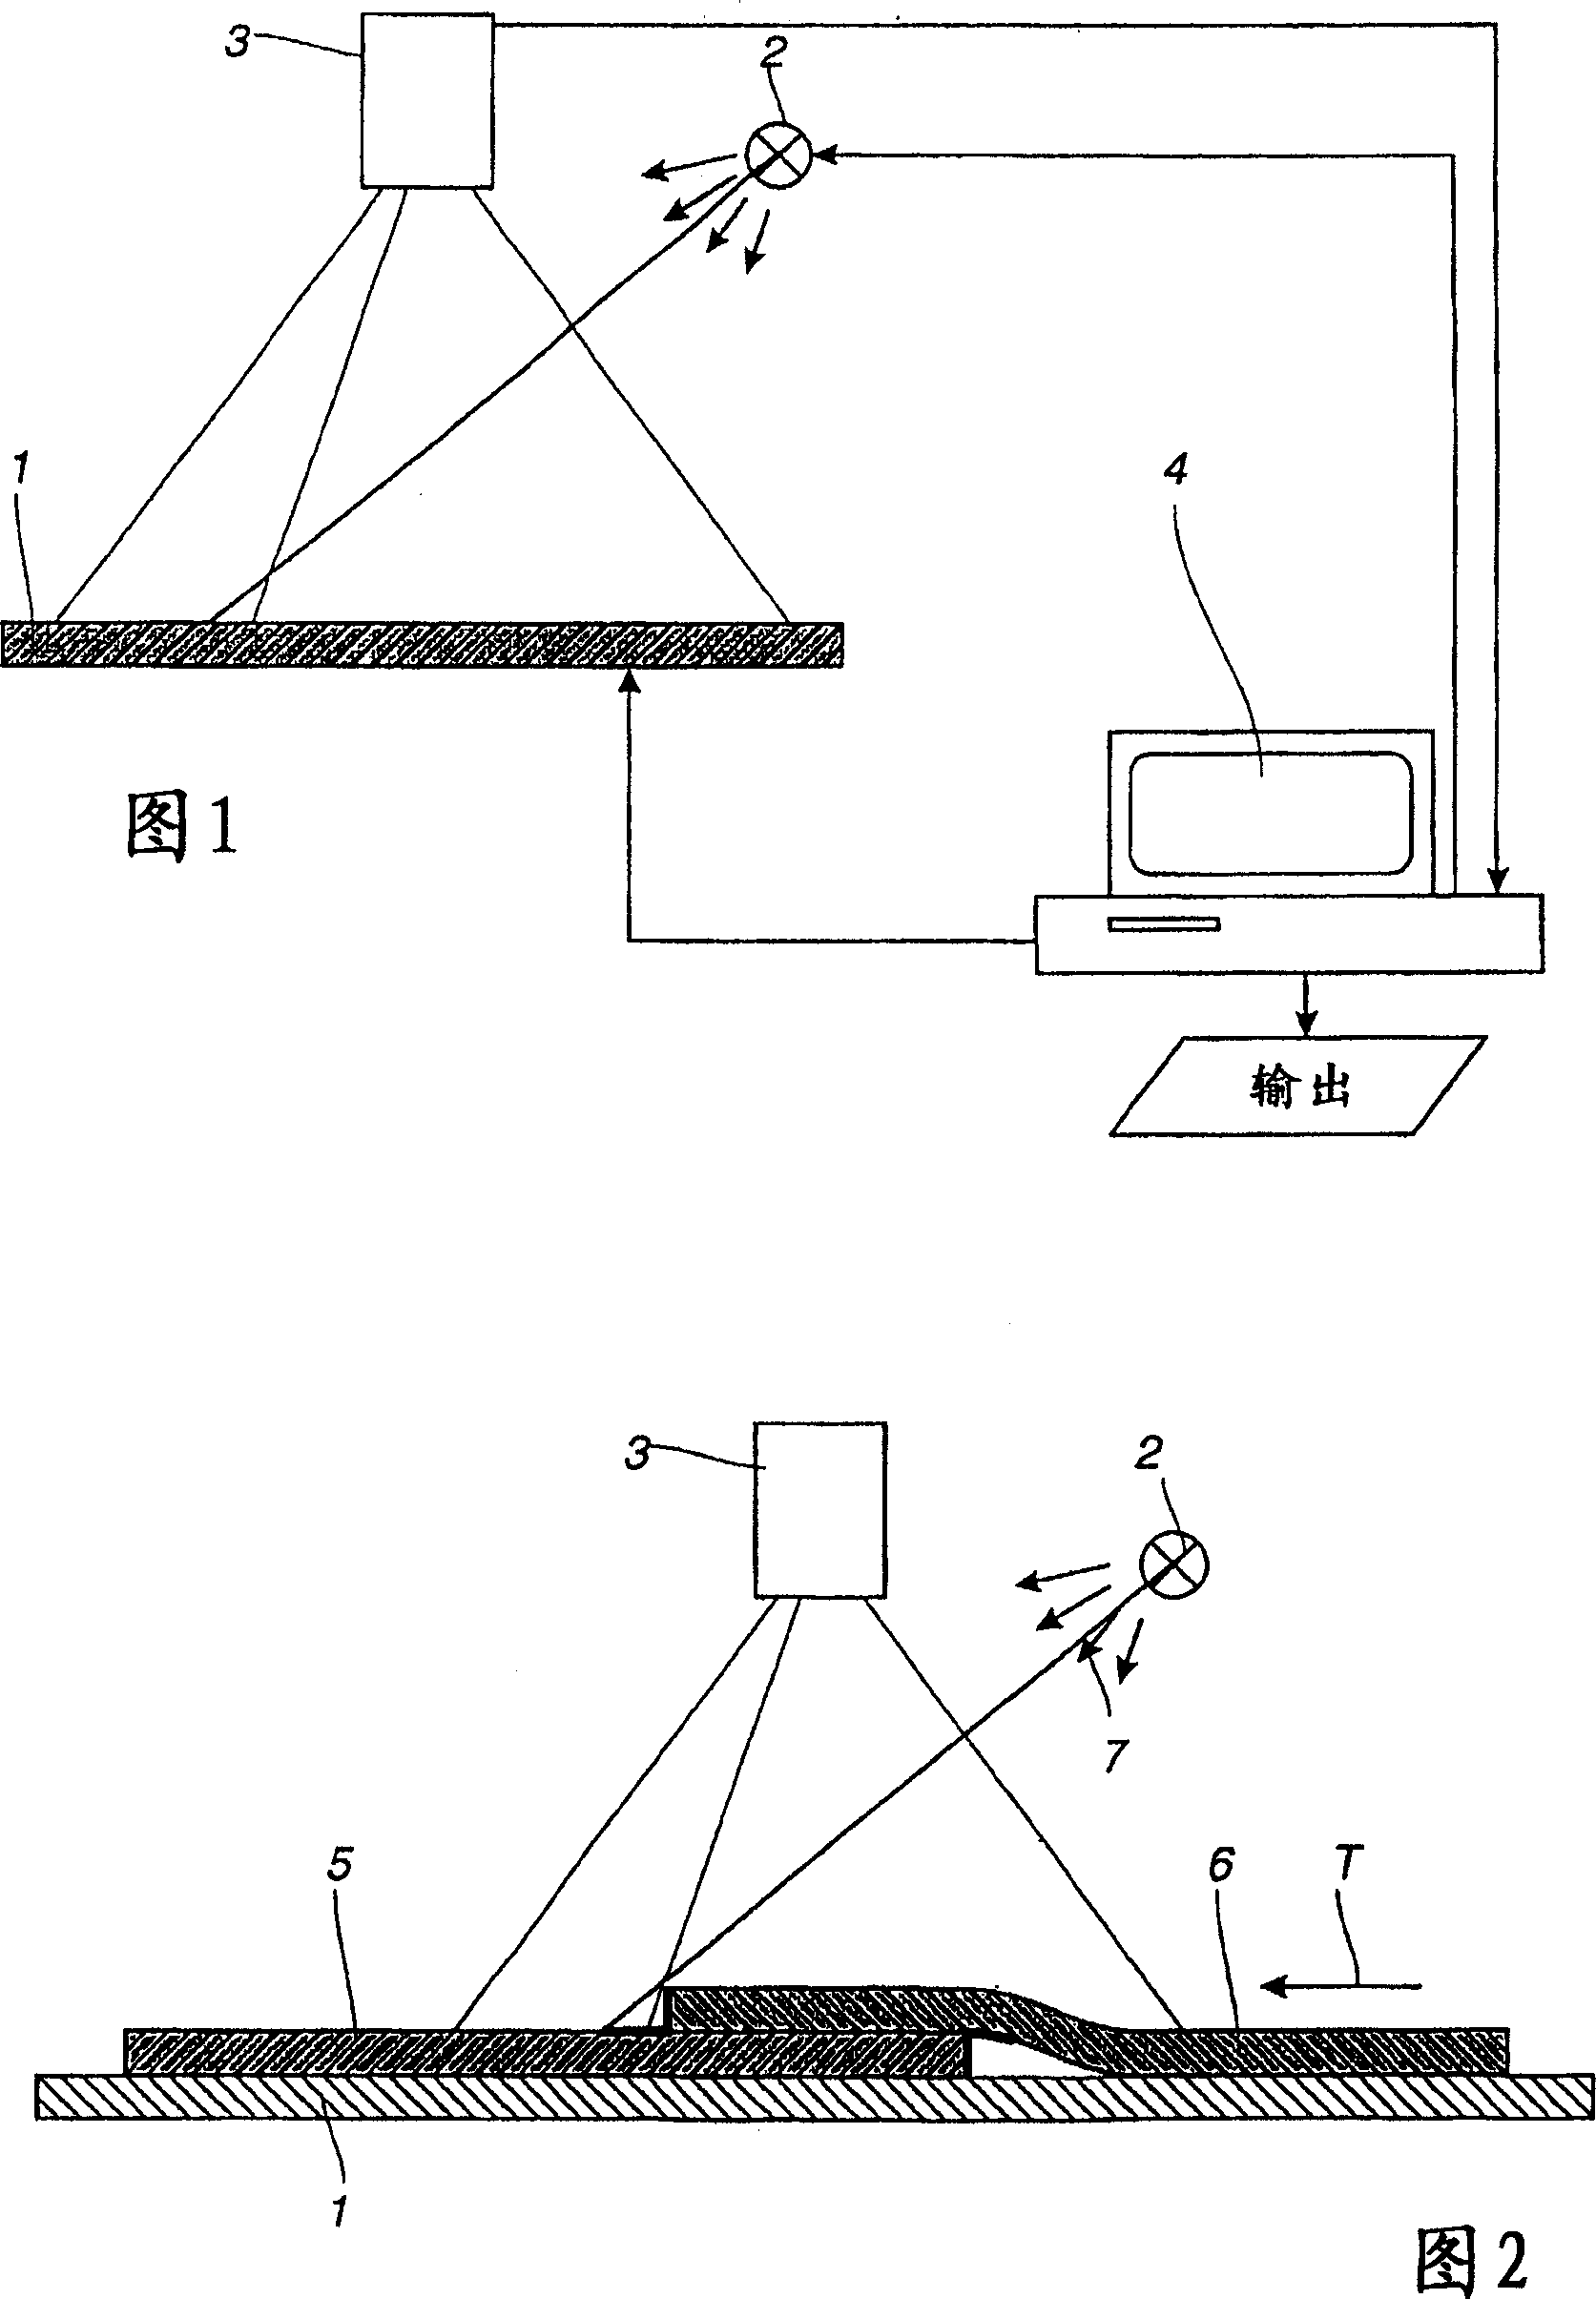 Apparatus for detecting joints in rubber sheets